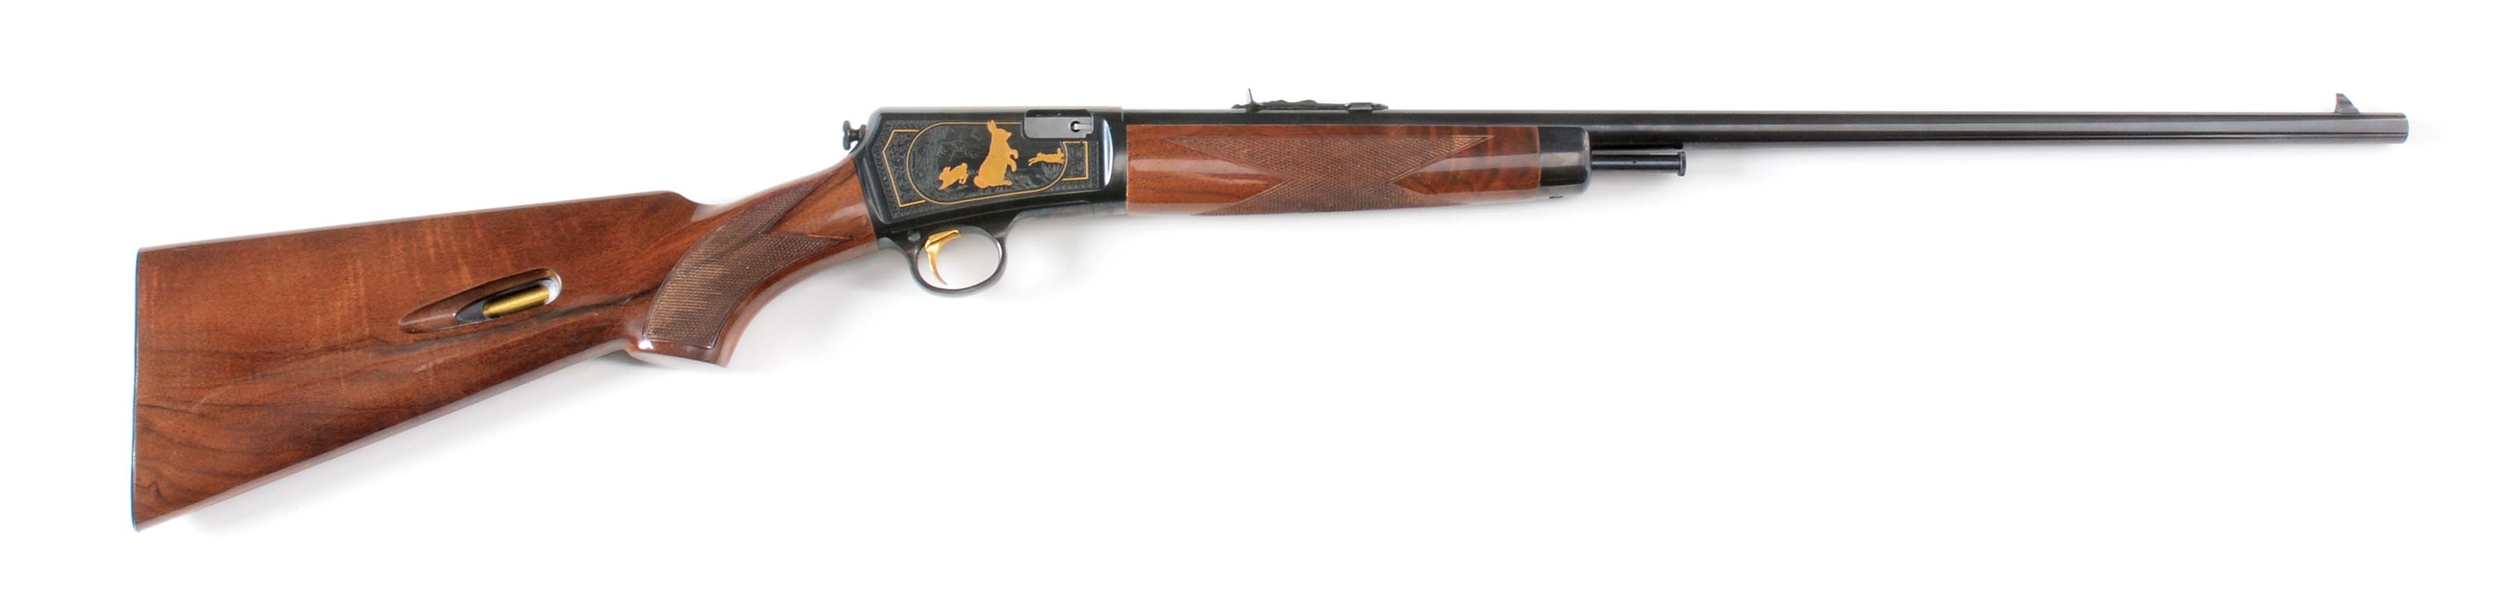 (M) DELUXE WINCHESTER MODEL 63 SEMI-AUTOMATIC WITH GOLD INLAYS.